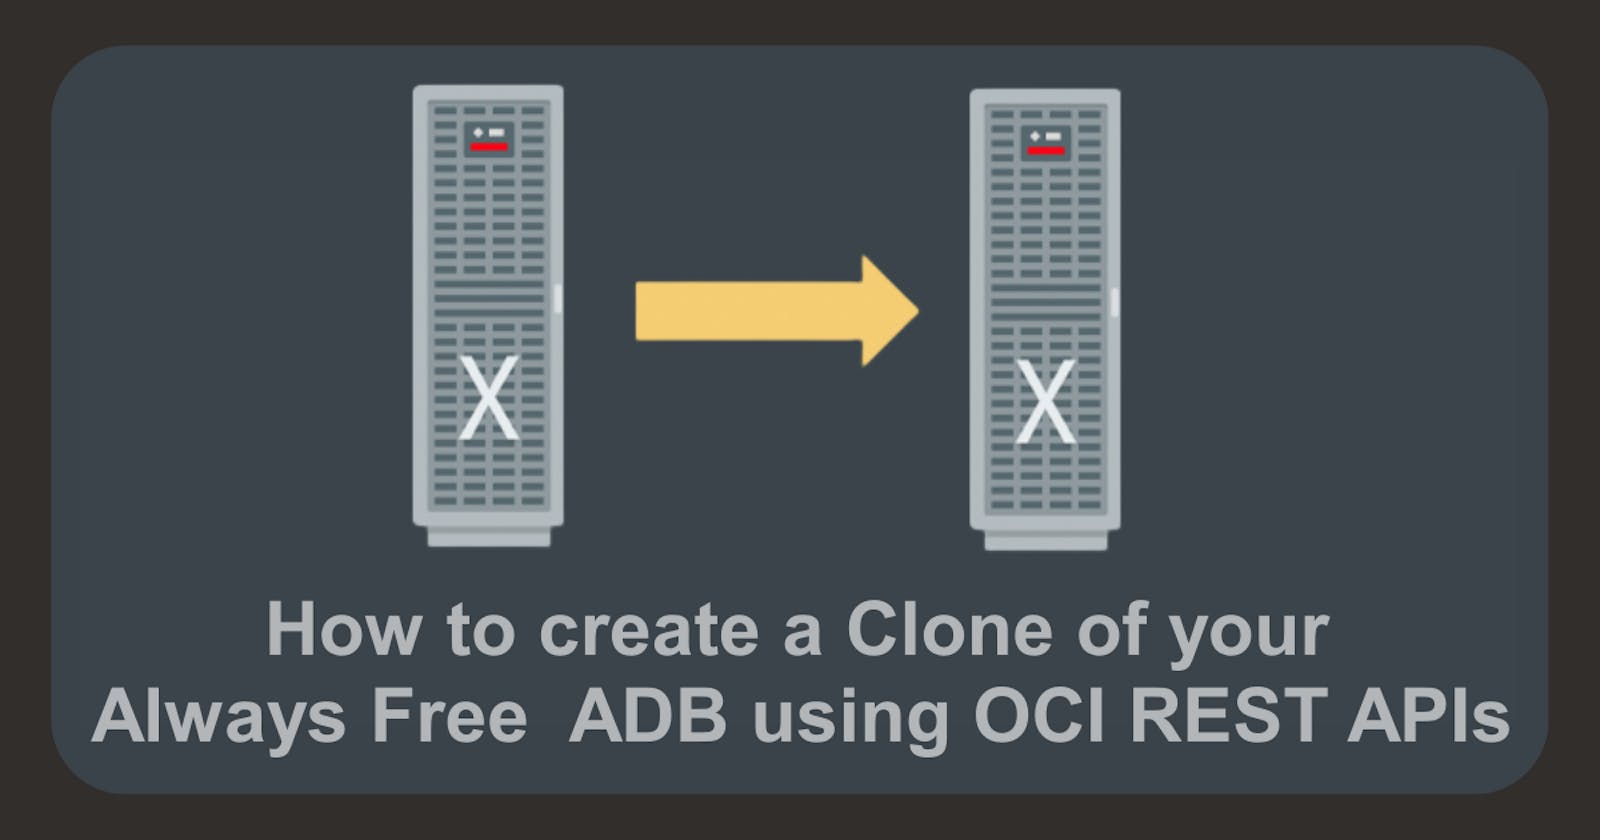 How to create a Clone of your Always Free ADB using OCI REST APIs